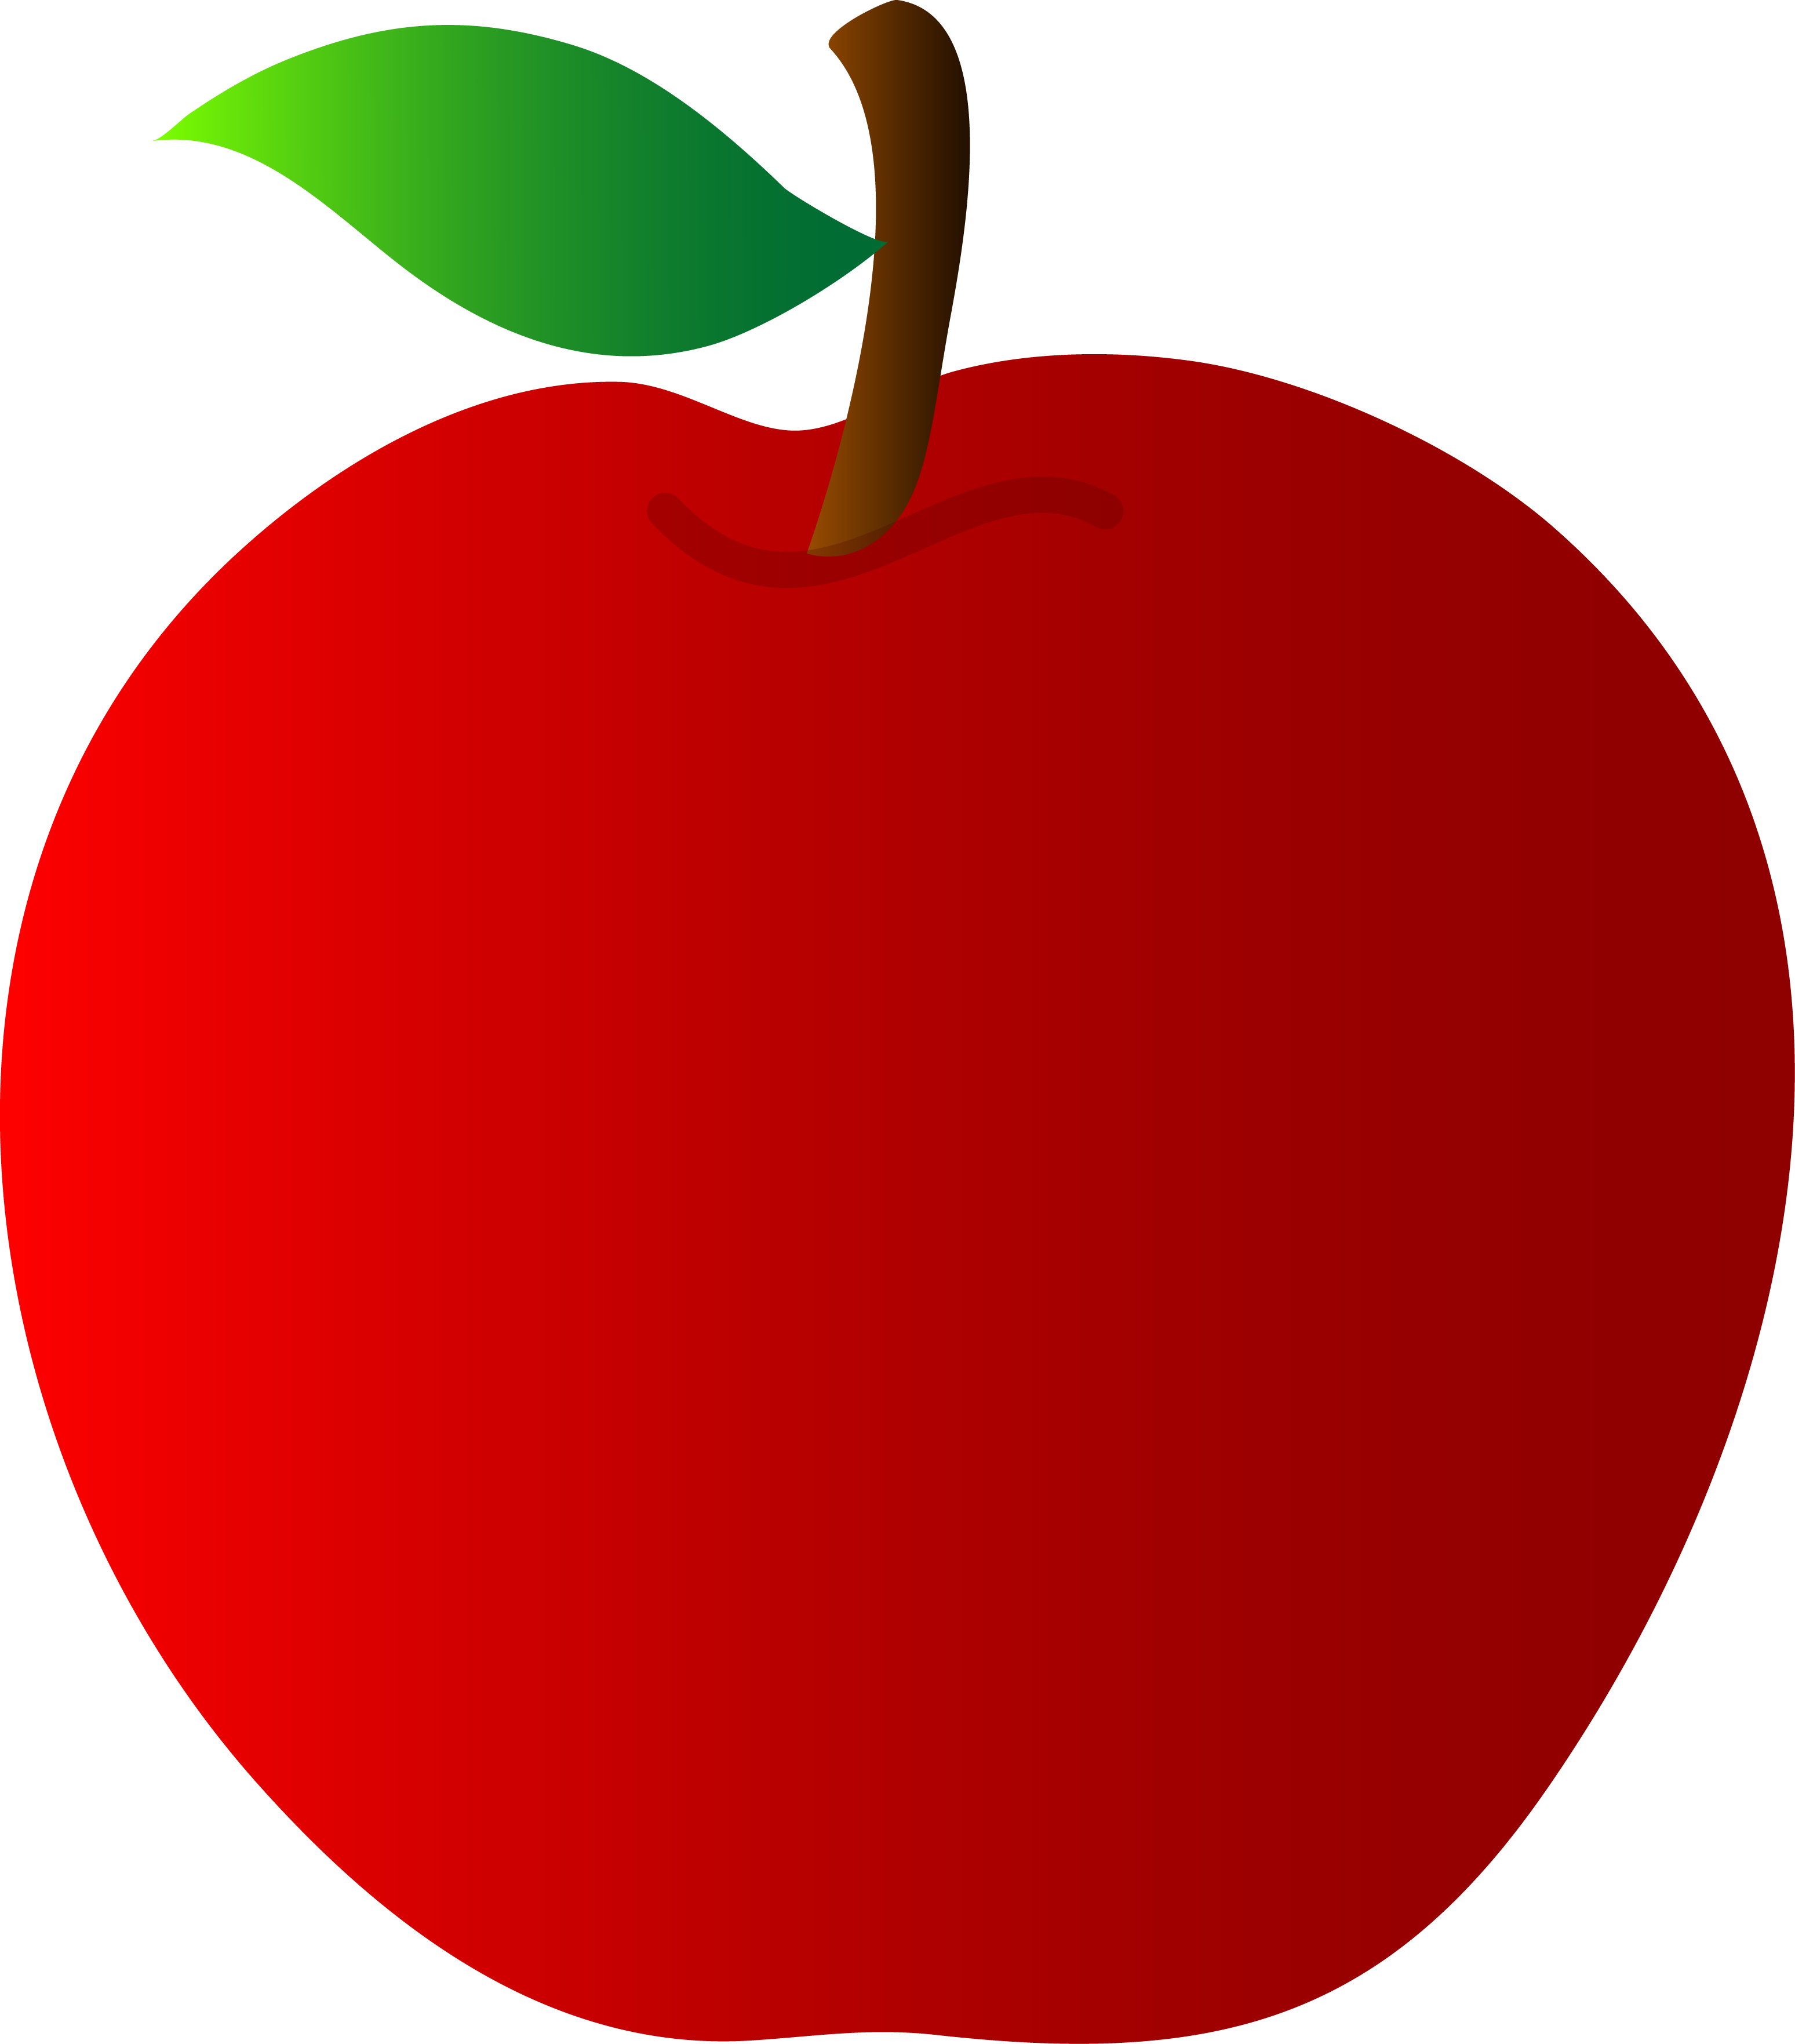 Cartoon Images Of Apple - ClipArt Best